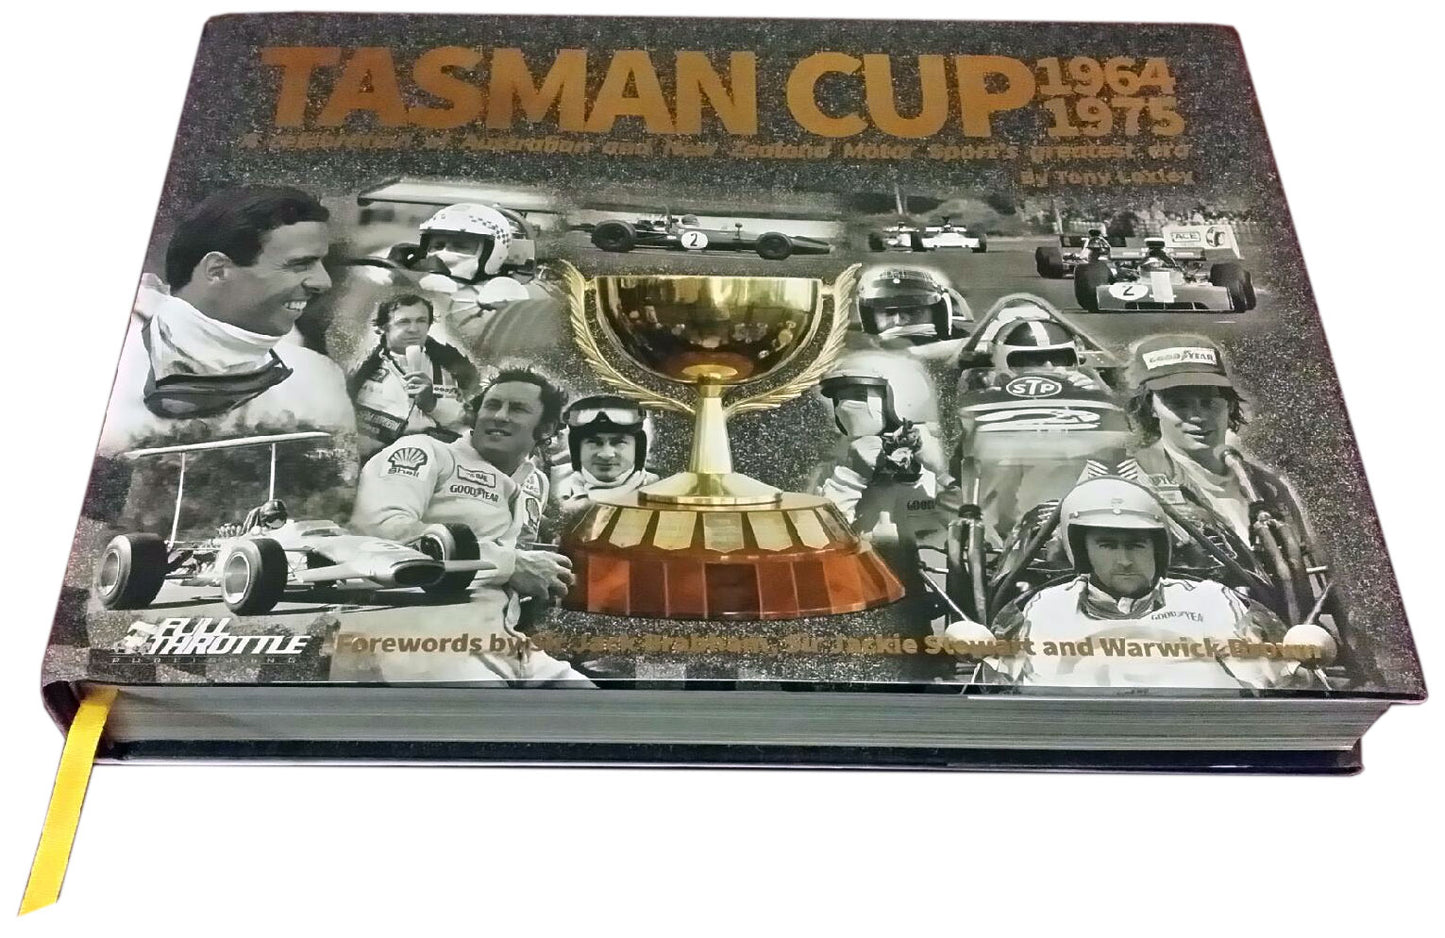 The Tasman Cup Book is now ready for ordering